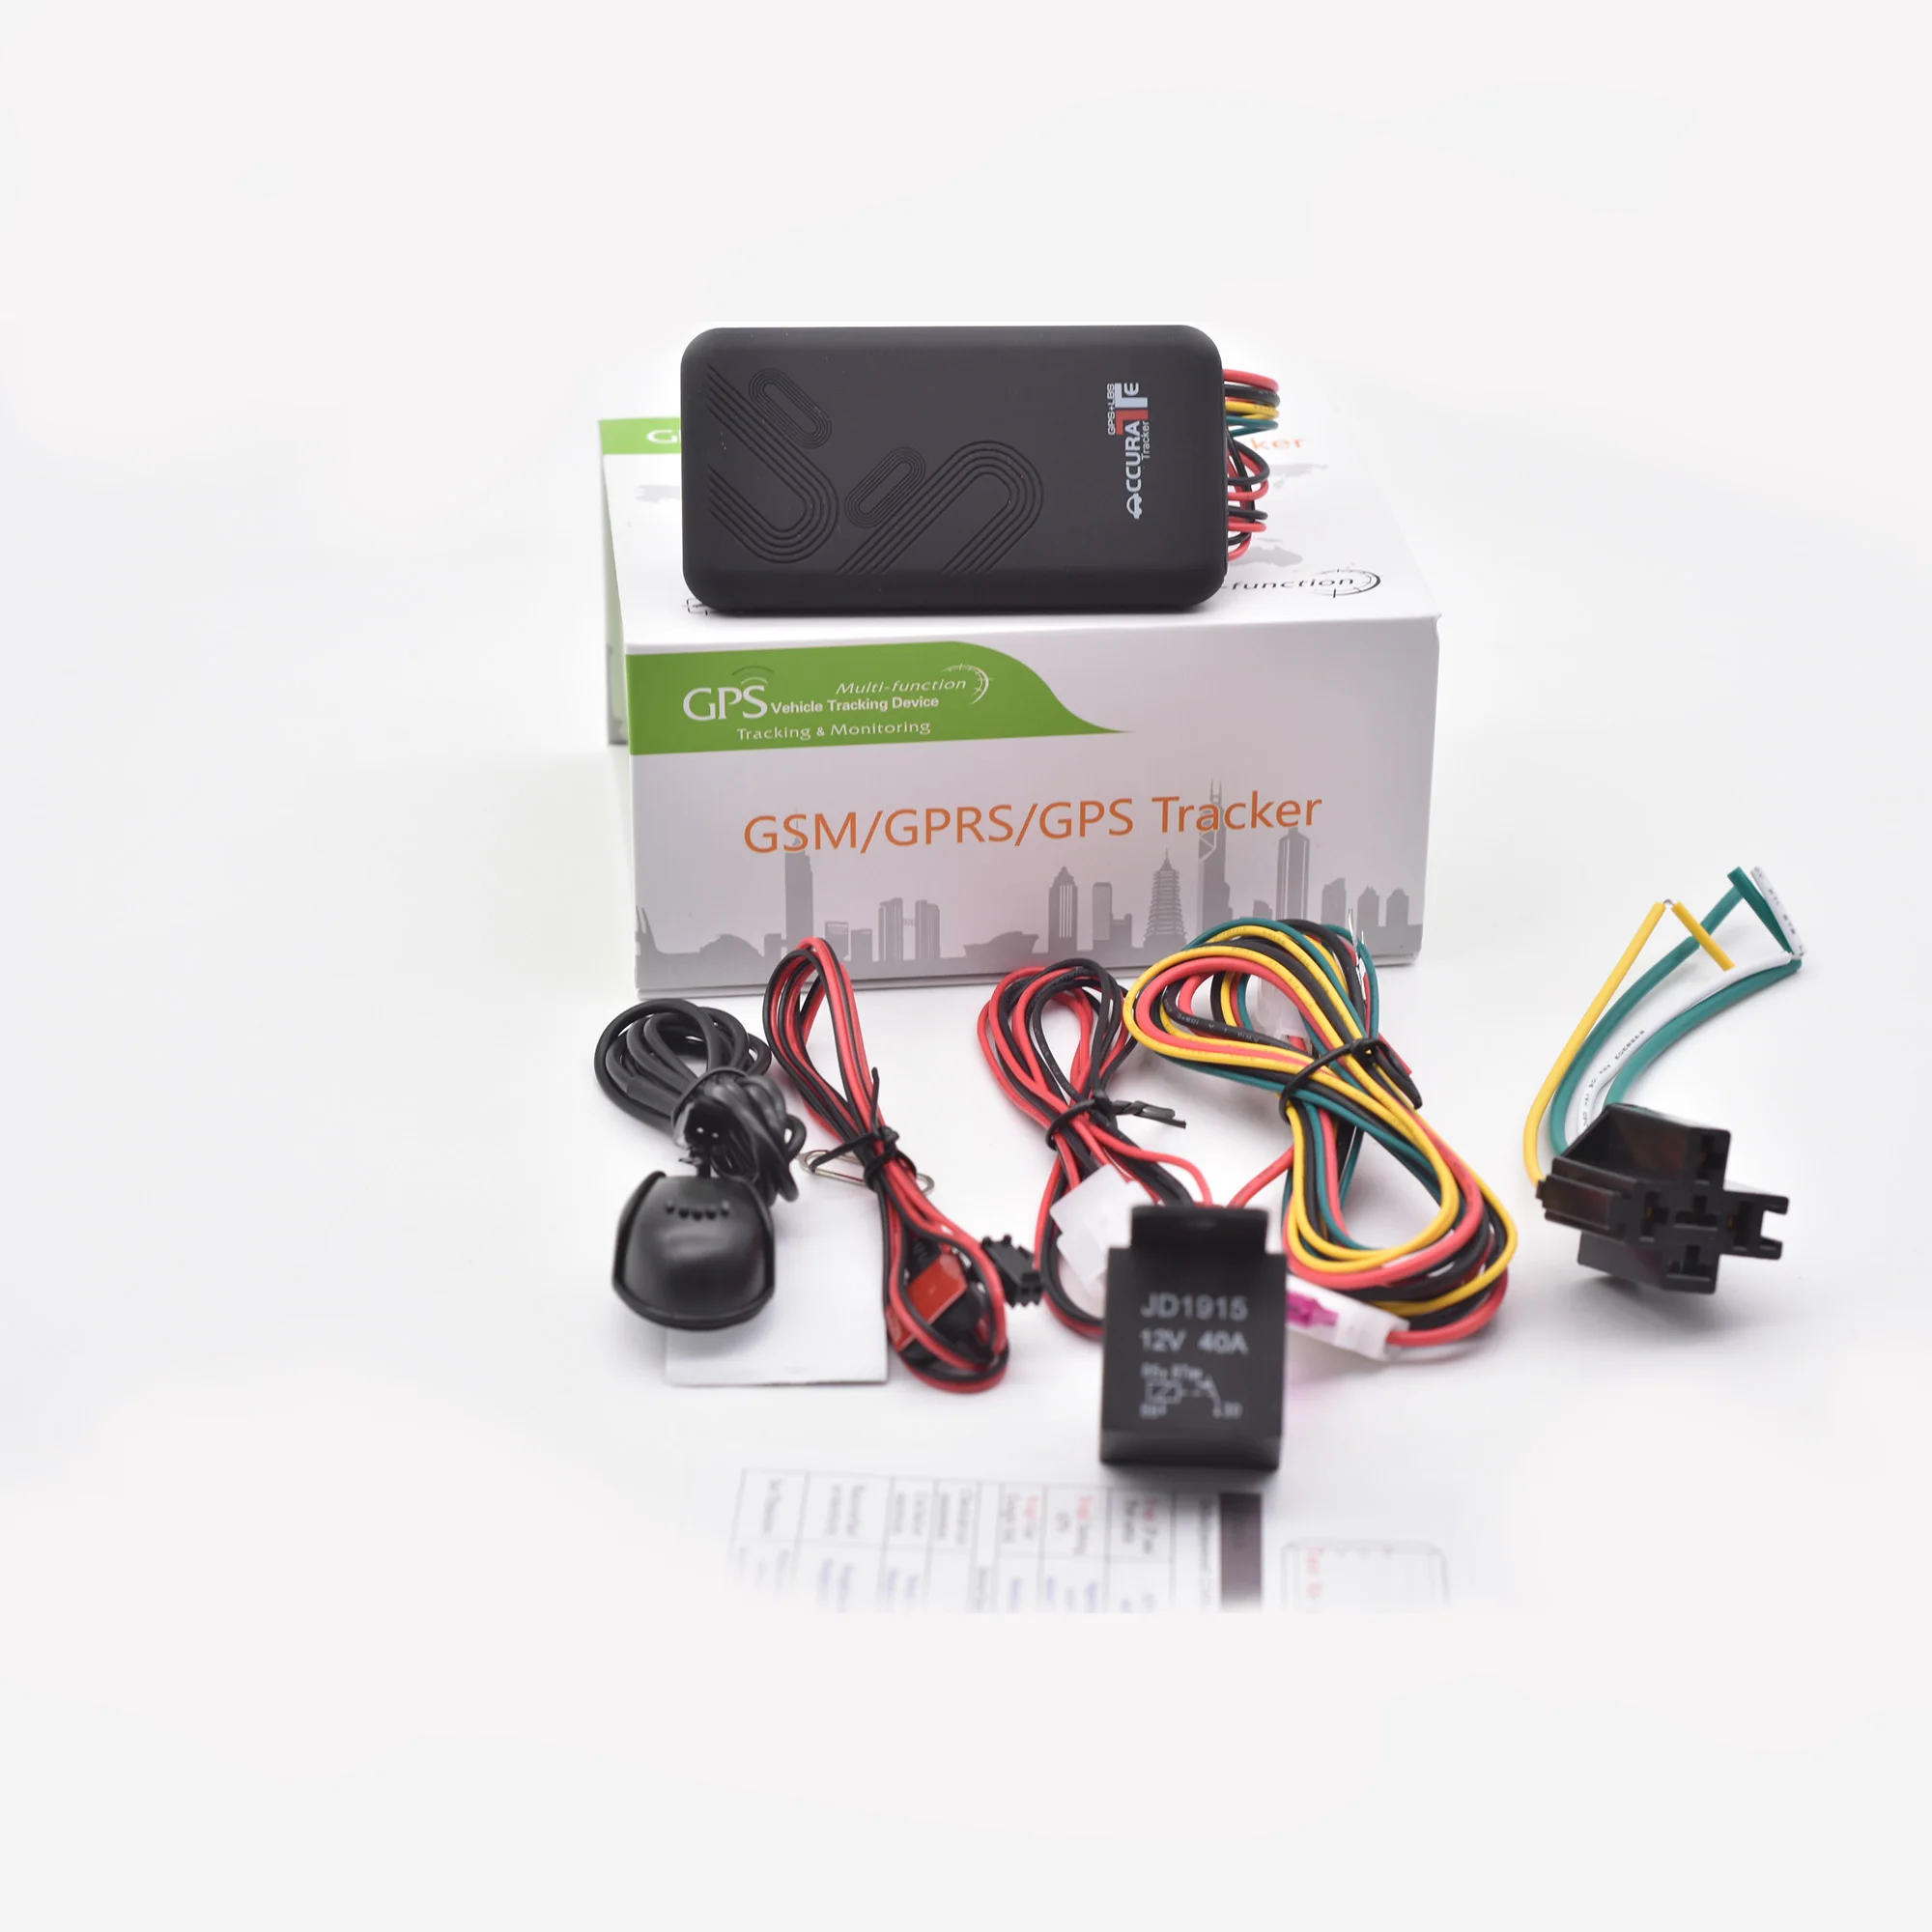 Alexander Graham Bell flor Incitar Wholesale GT06 Car GPS tracker manual gps sms gprs tracker made in china  with vehicle tracking system From m.alibaba.com